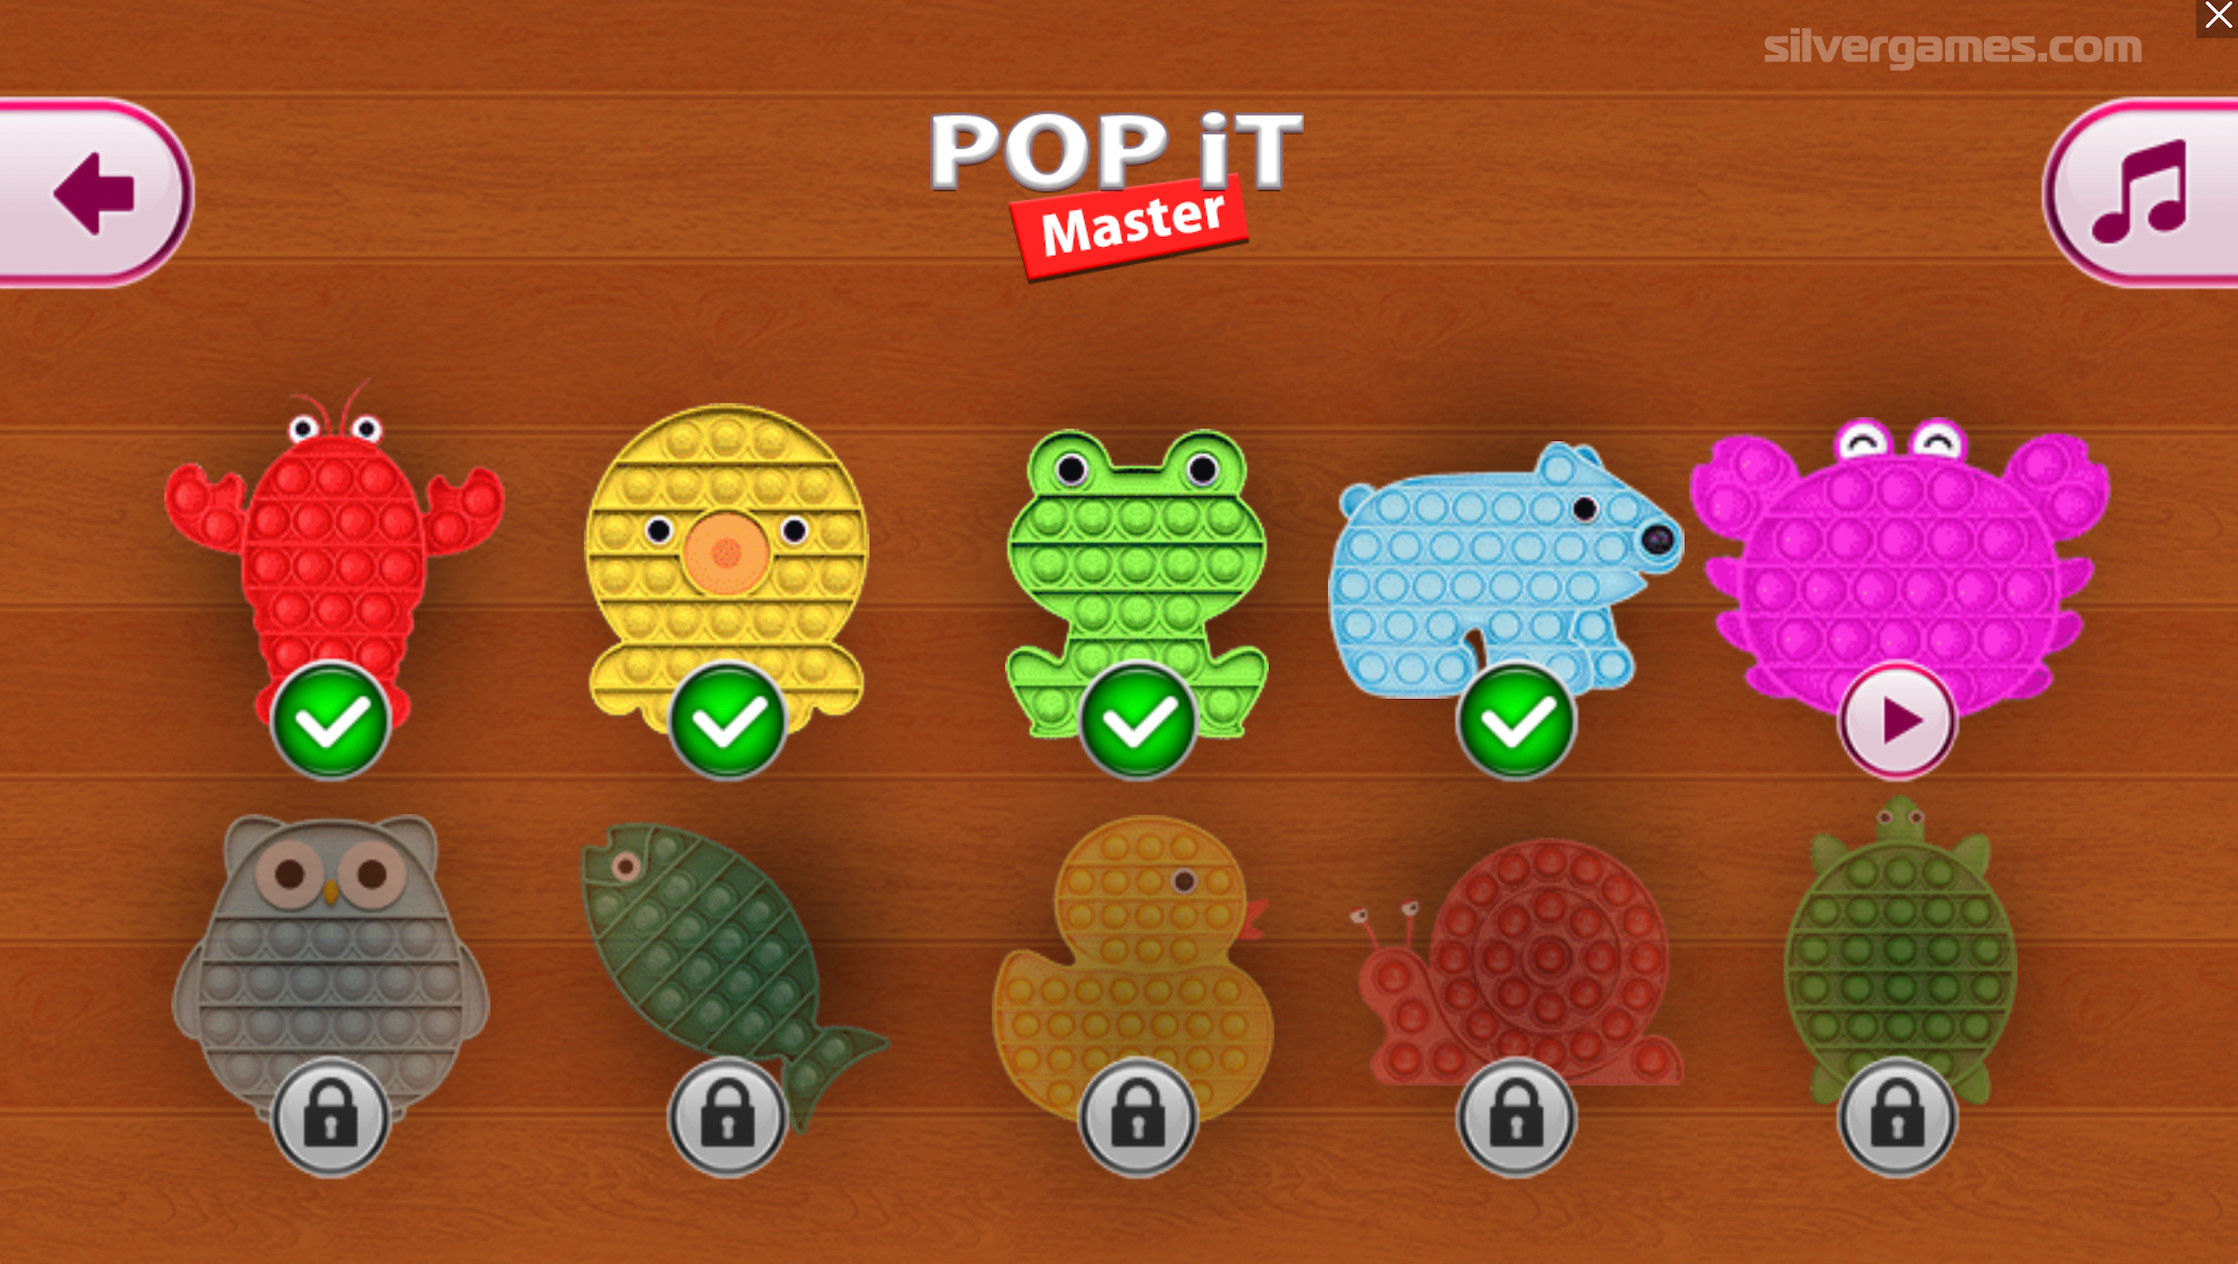 POP IT MASTER - Play Online for Free!